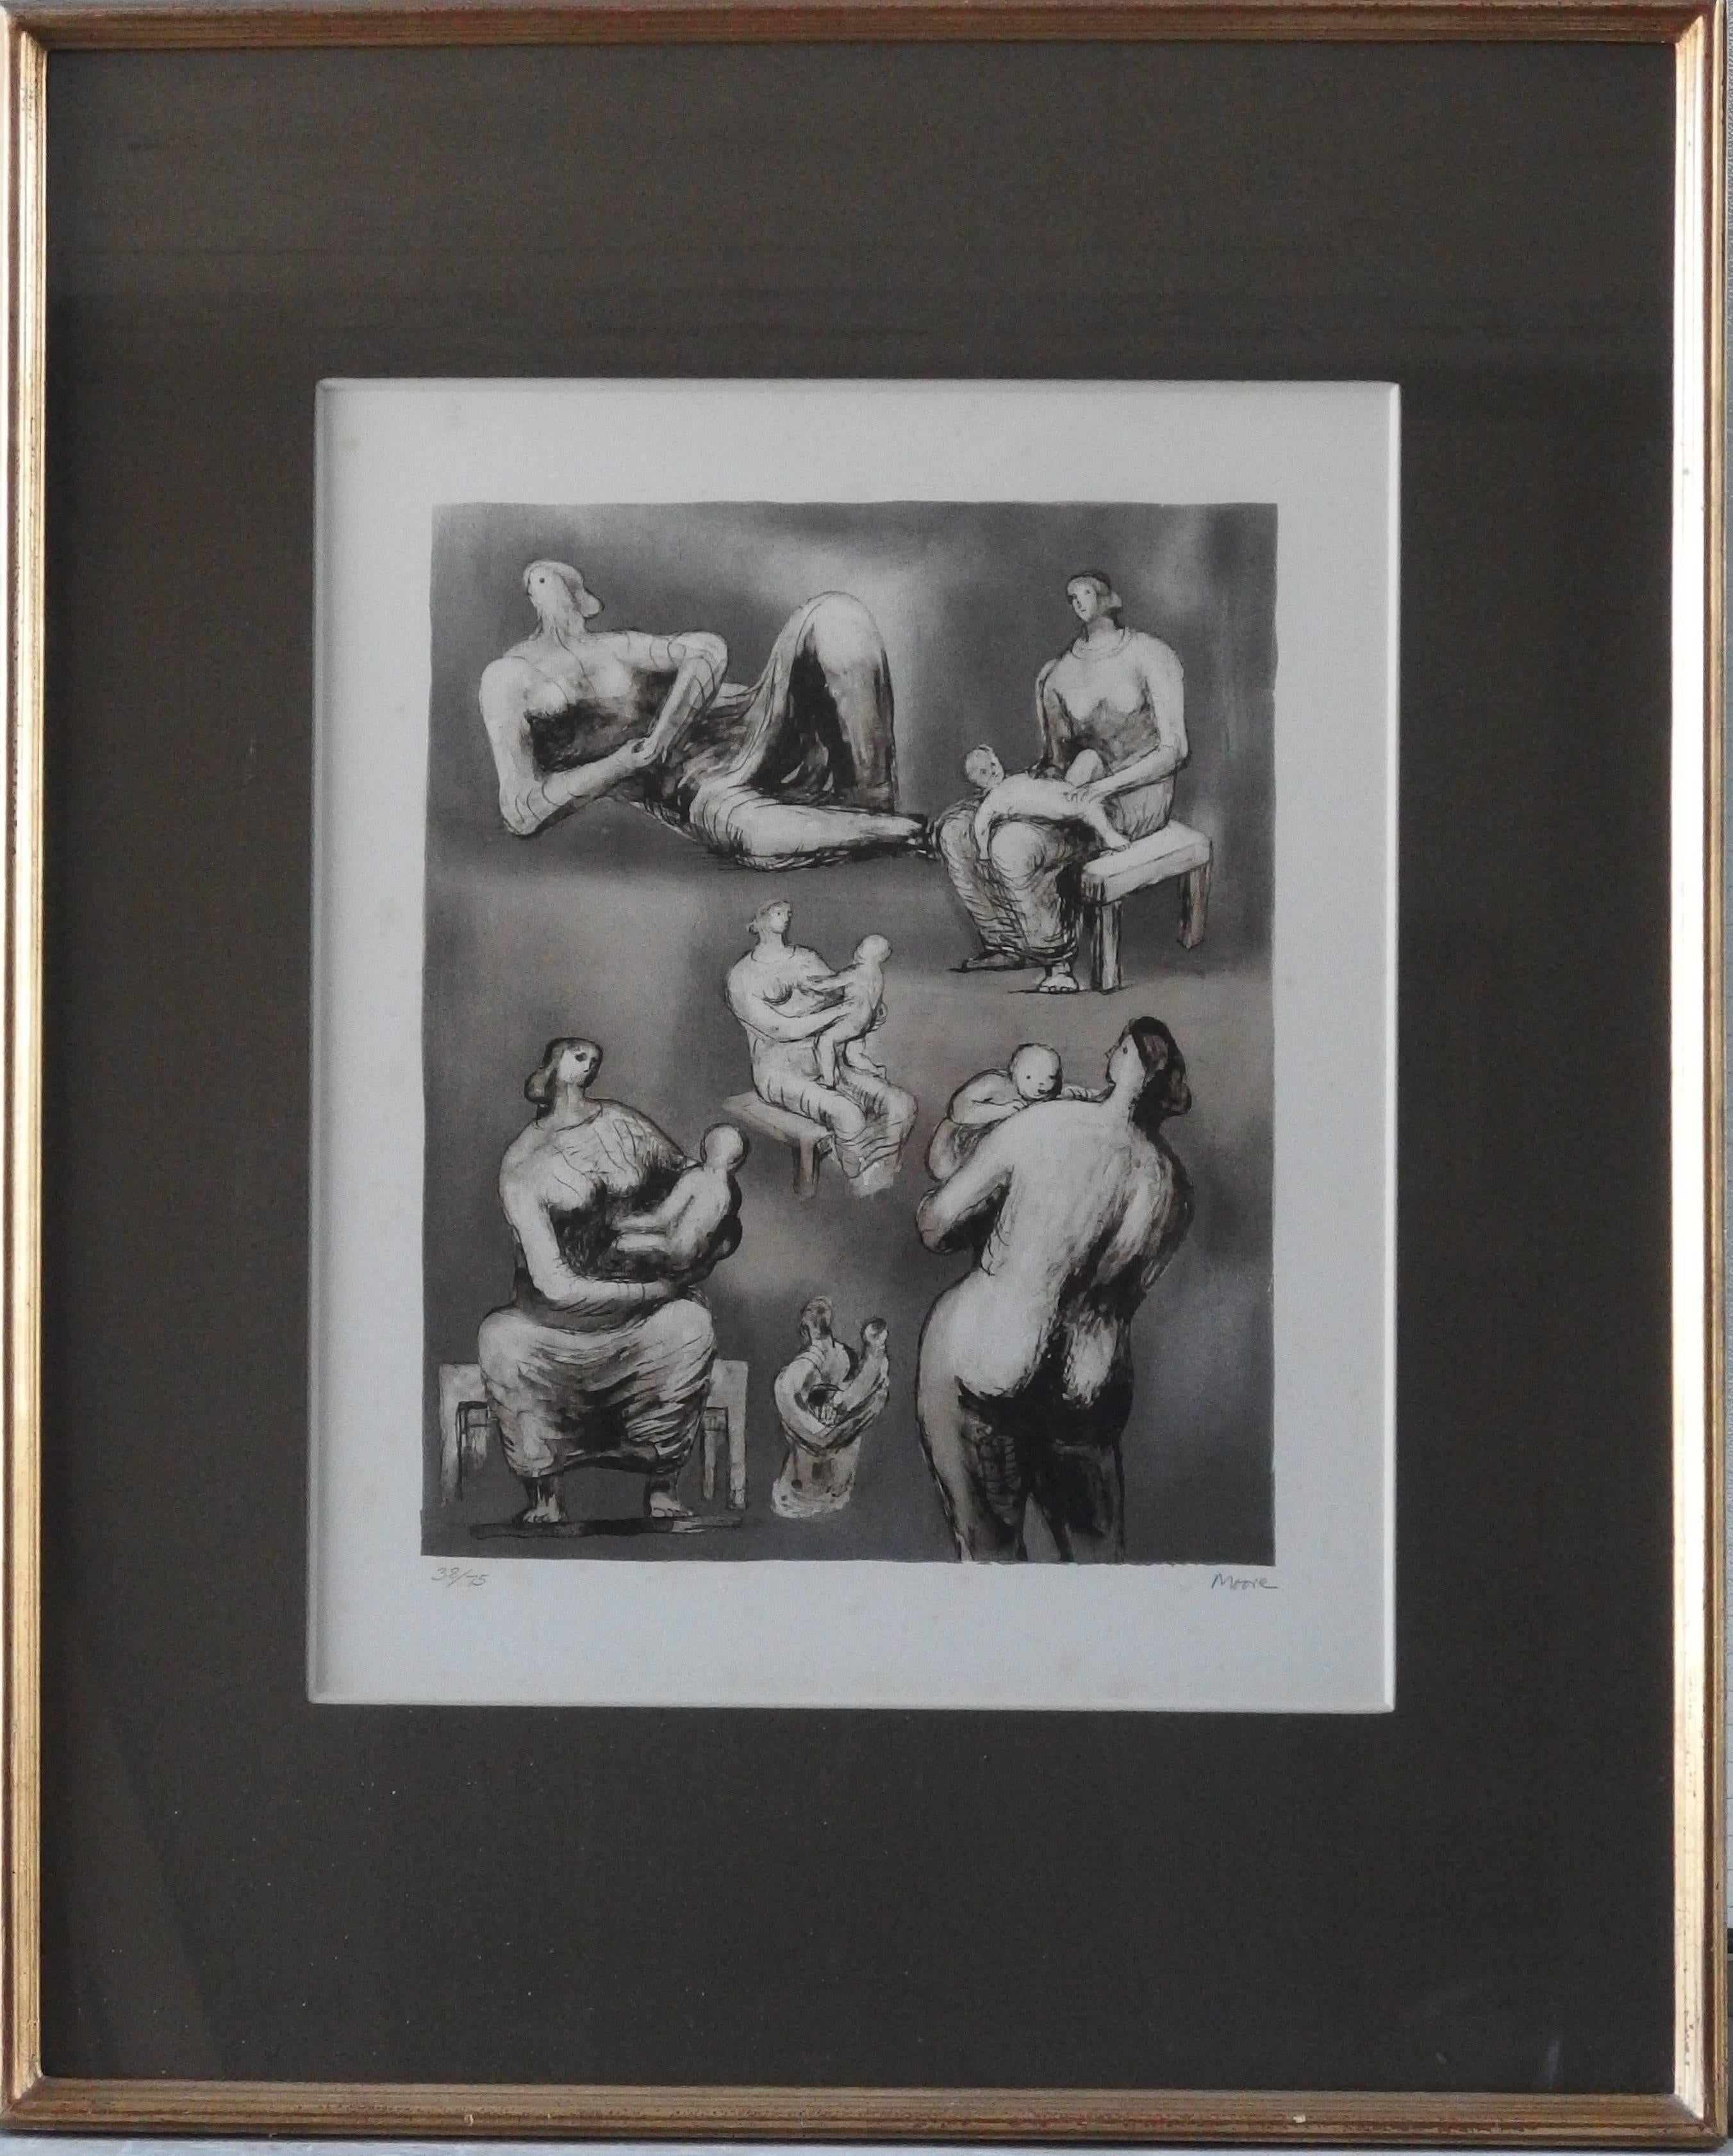 Mother and Child Studies - Original Handsigned Lithograph - 75 copies - Gray Figurative Print by Henry Moore